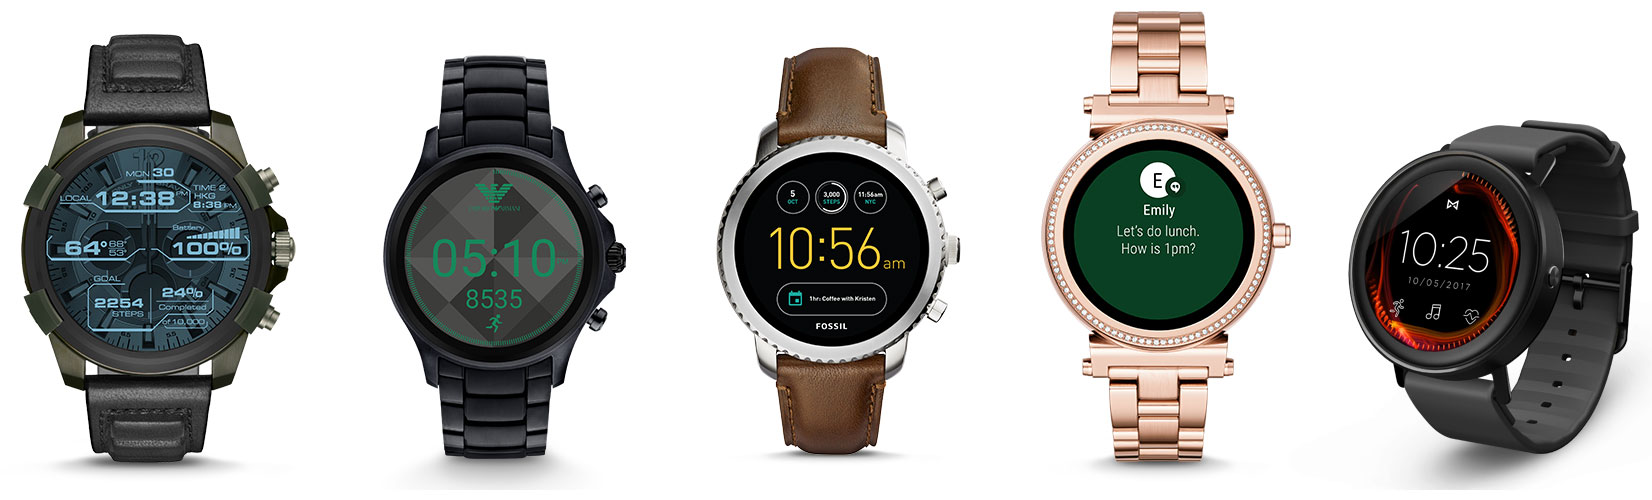 Fossil Group releases new full-round touchscreen smartwatches for Diesel, Emporio Armani, Fossil Q, Michael Kors and Misfit